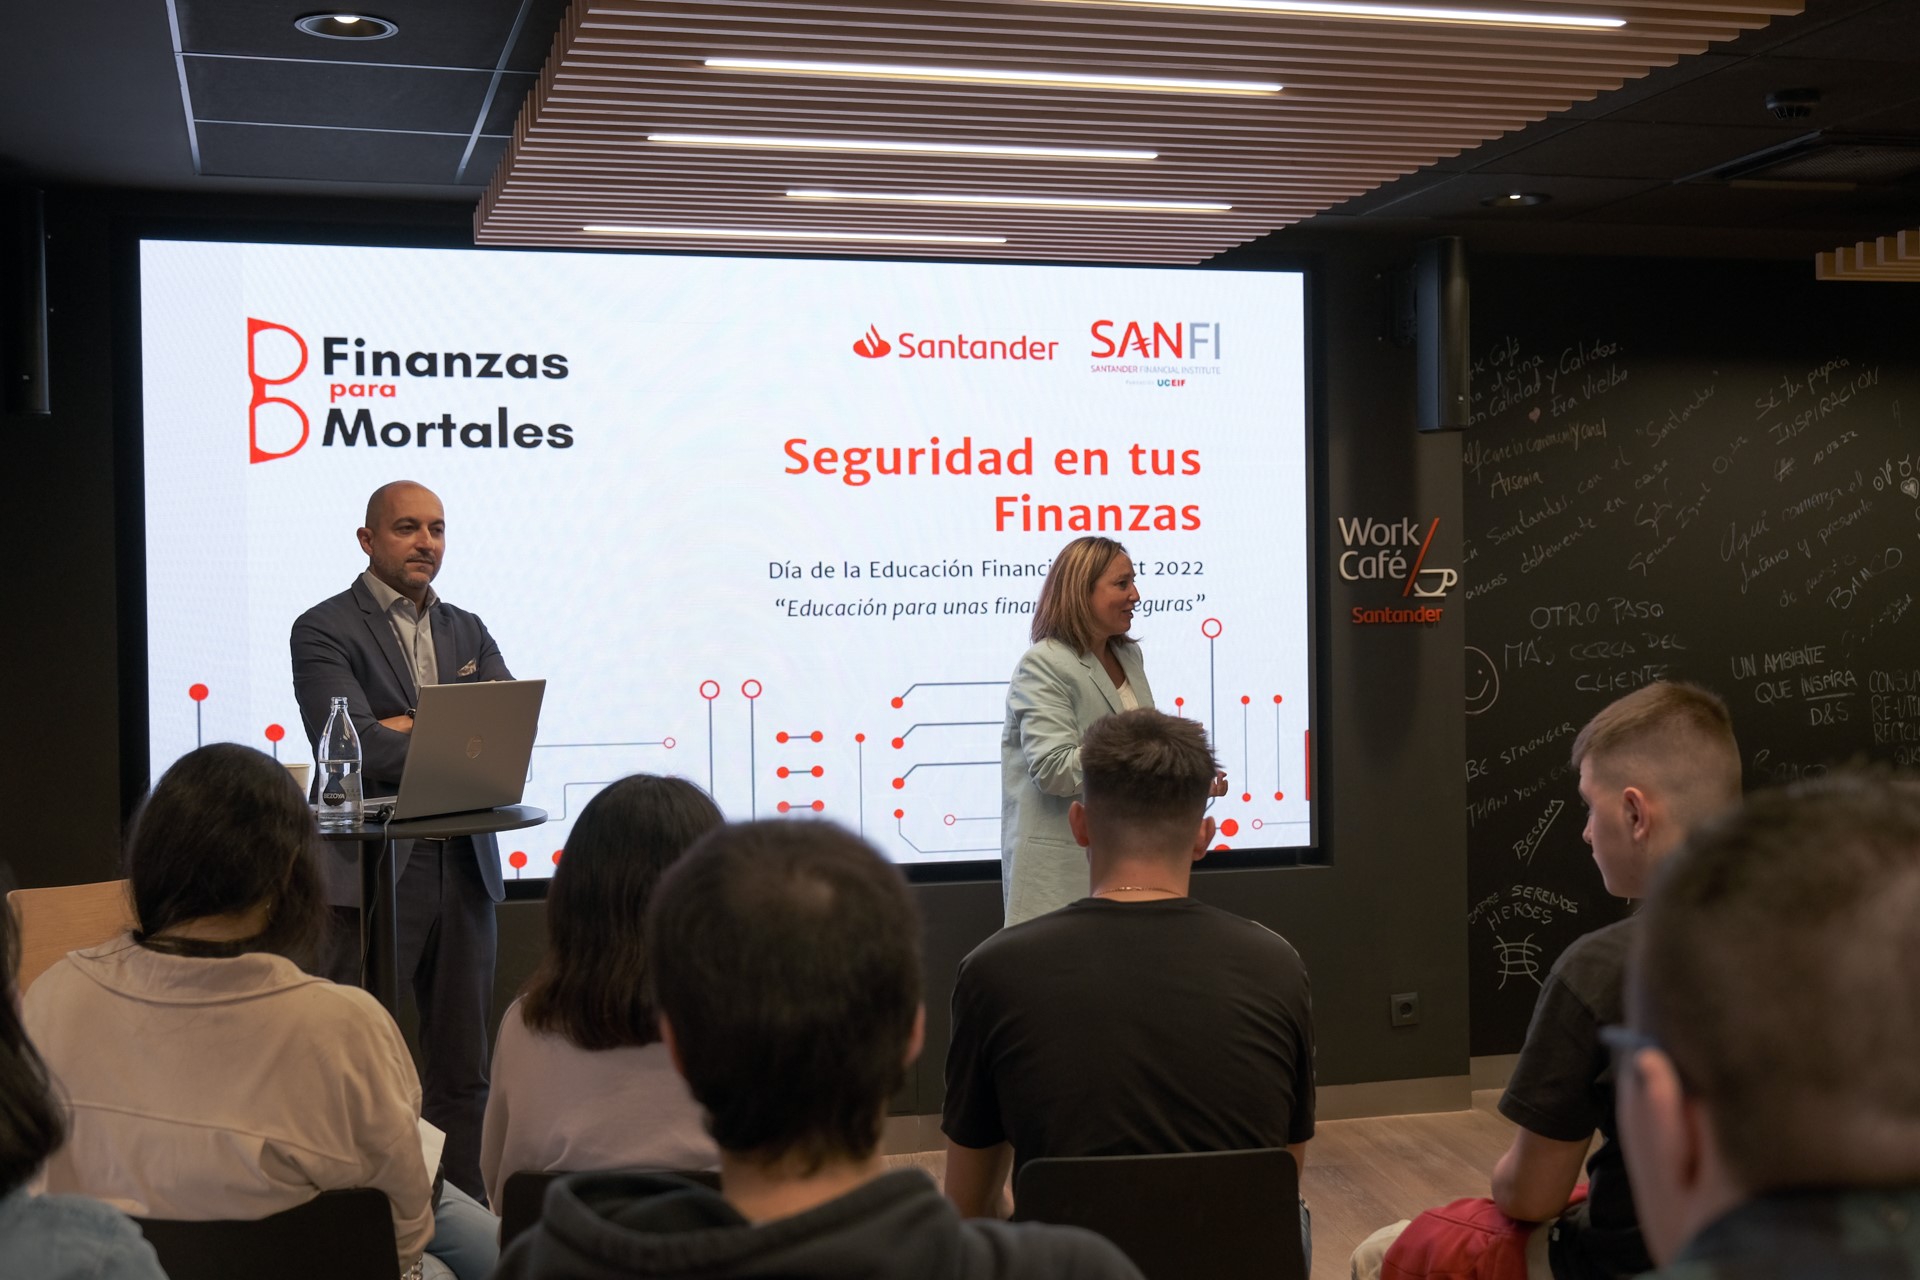 Banco Santander is participating in Global Money Week to promote financial education among young people